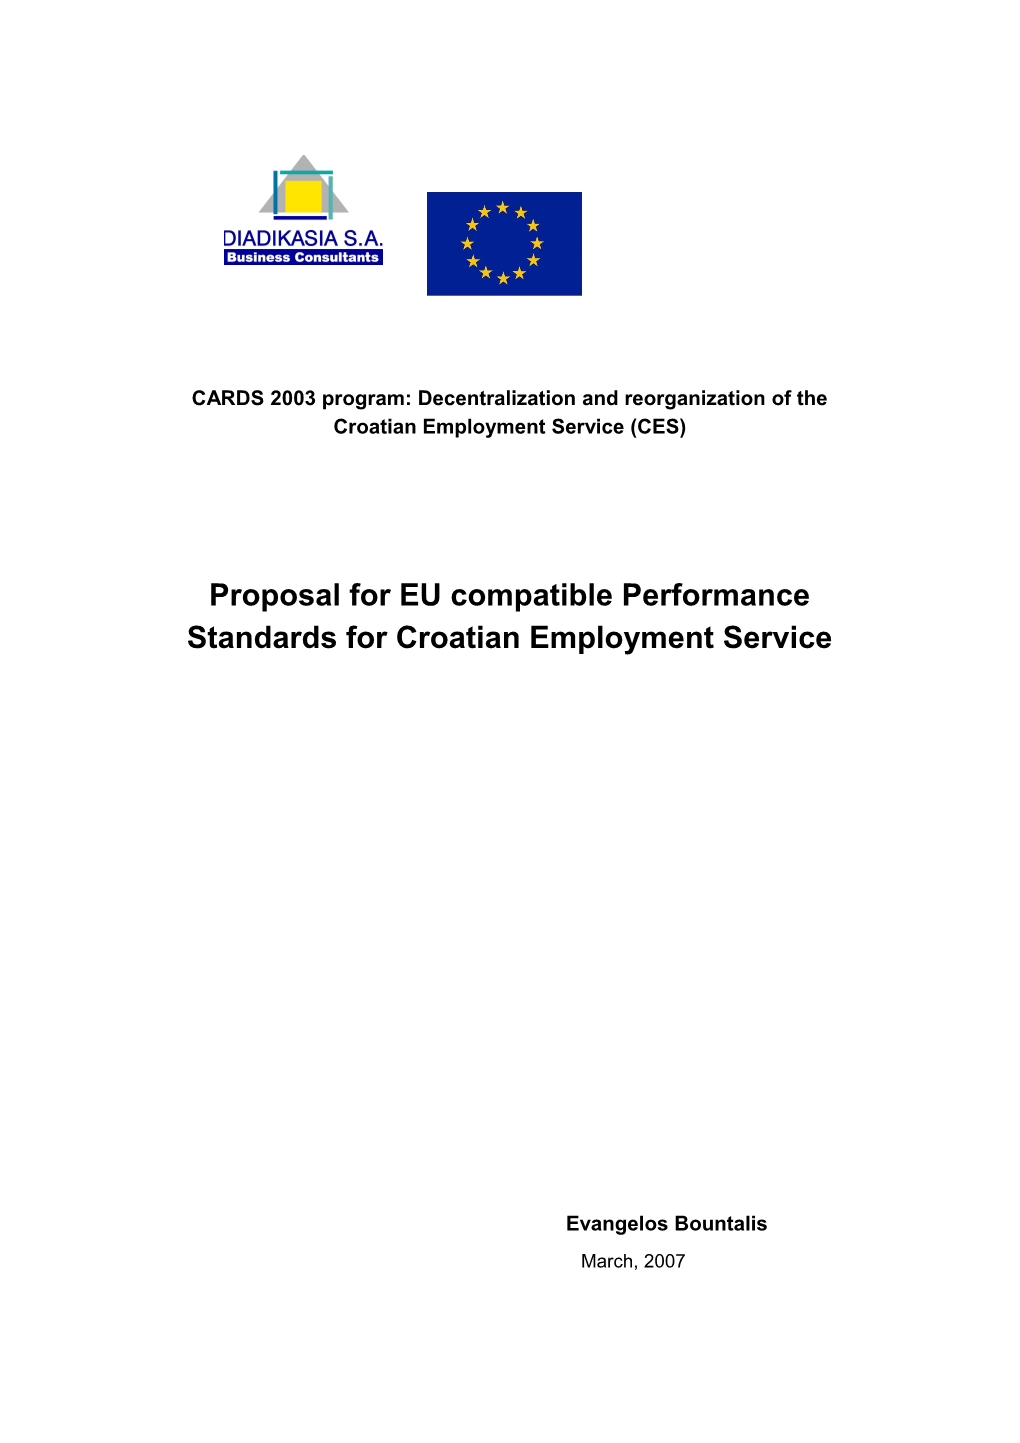 Proposal for EU Compatible Performance Standards for Croatian Employment Service